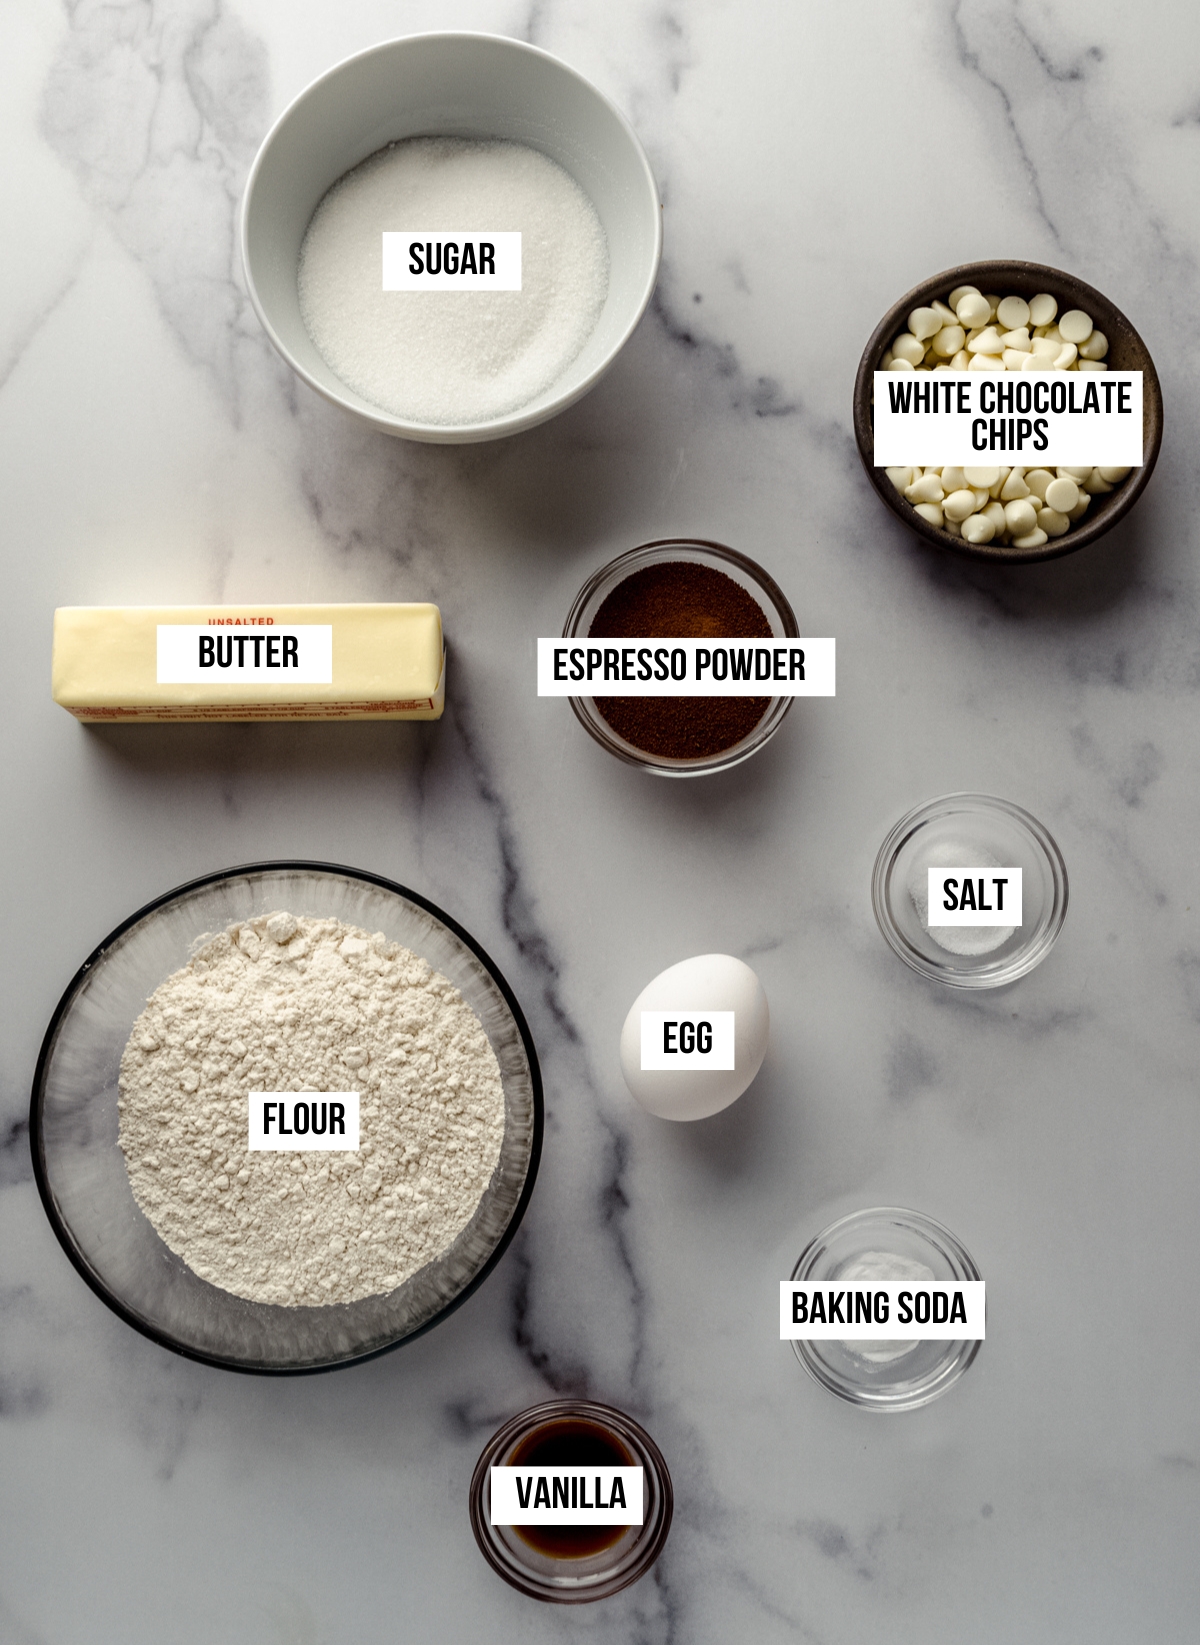 Aerial photo of ingredients to make cappuccino coffee cookies with text overlay labeling each ingredient.